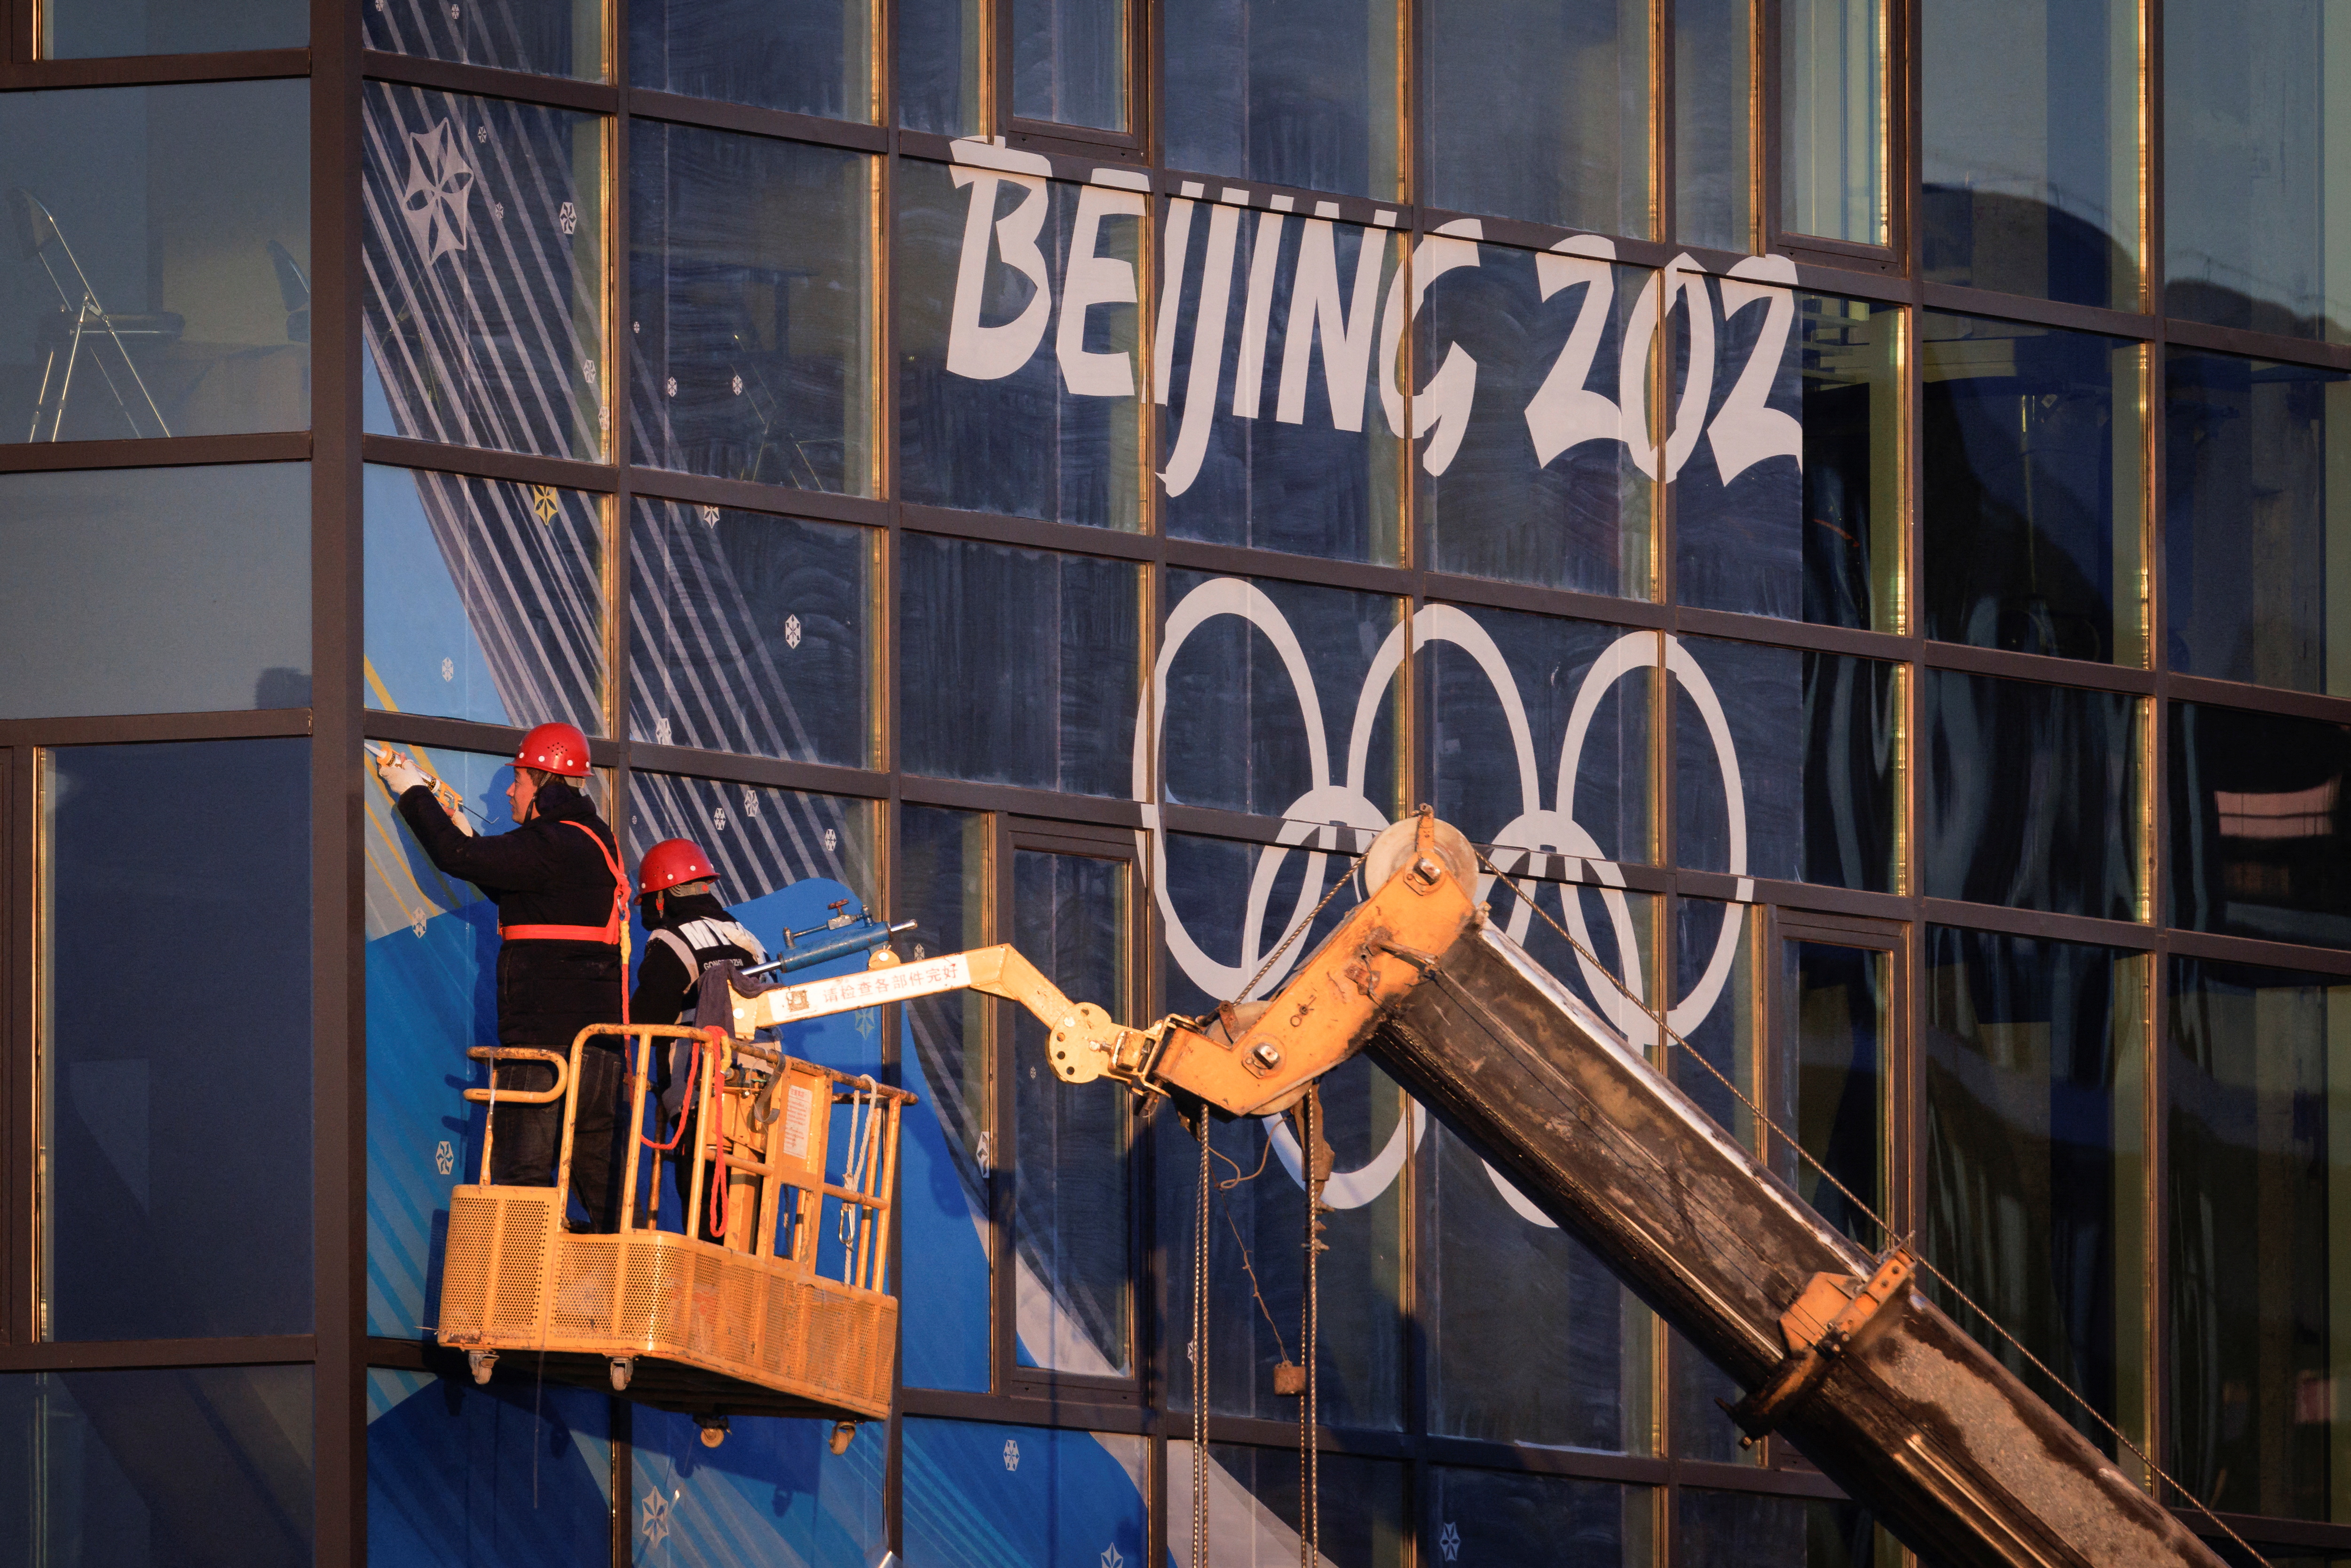 Workers attach signage near Big Air Shougang, a competition venue for the Beijing 2022 Winter Olympics, at Shougang Park, the site of a former steel mill, in Beijing, China, December 28, 2021. Picture taken December 28, 2021.  REUTERS/Thomas Peter